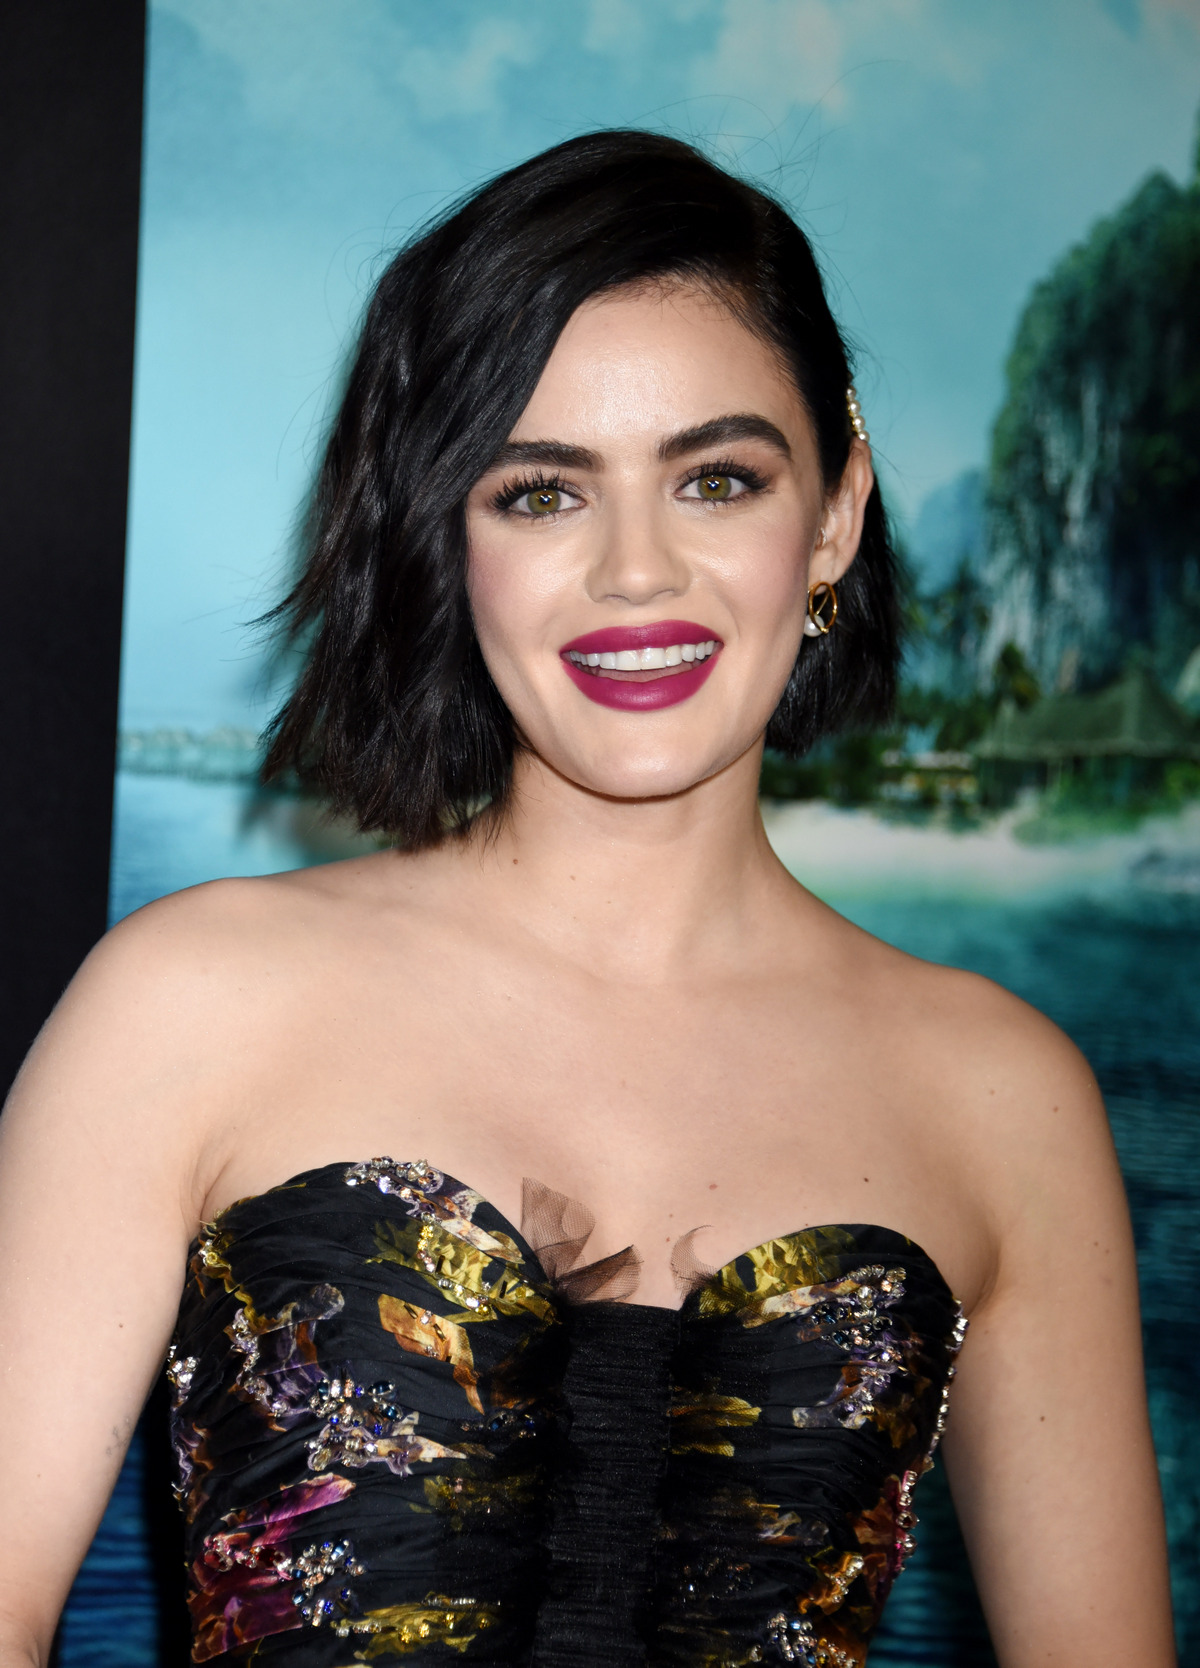 Lucy Hale – Short Side-Parted Chop